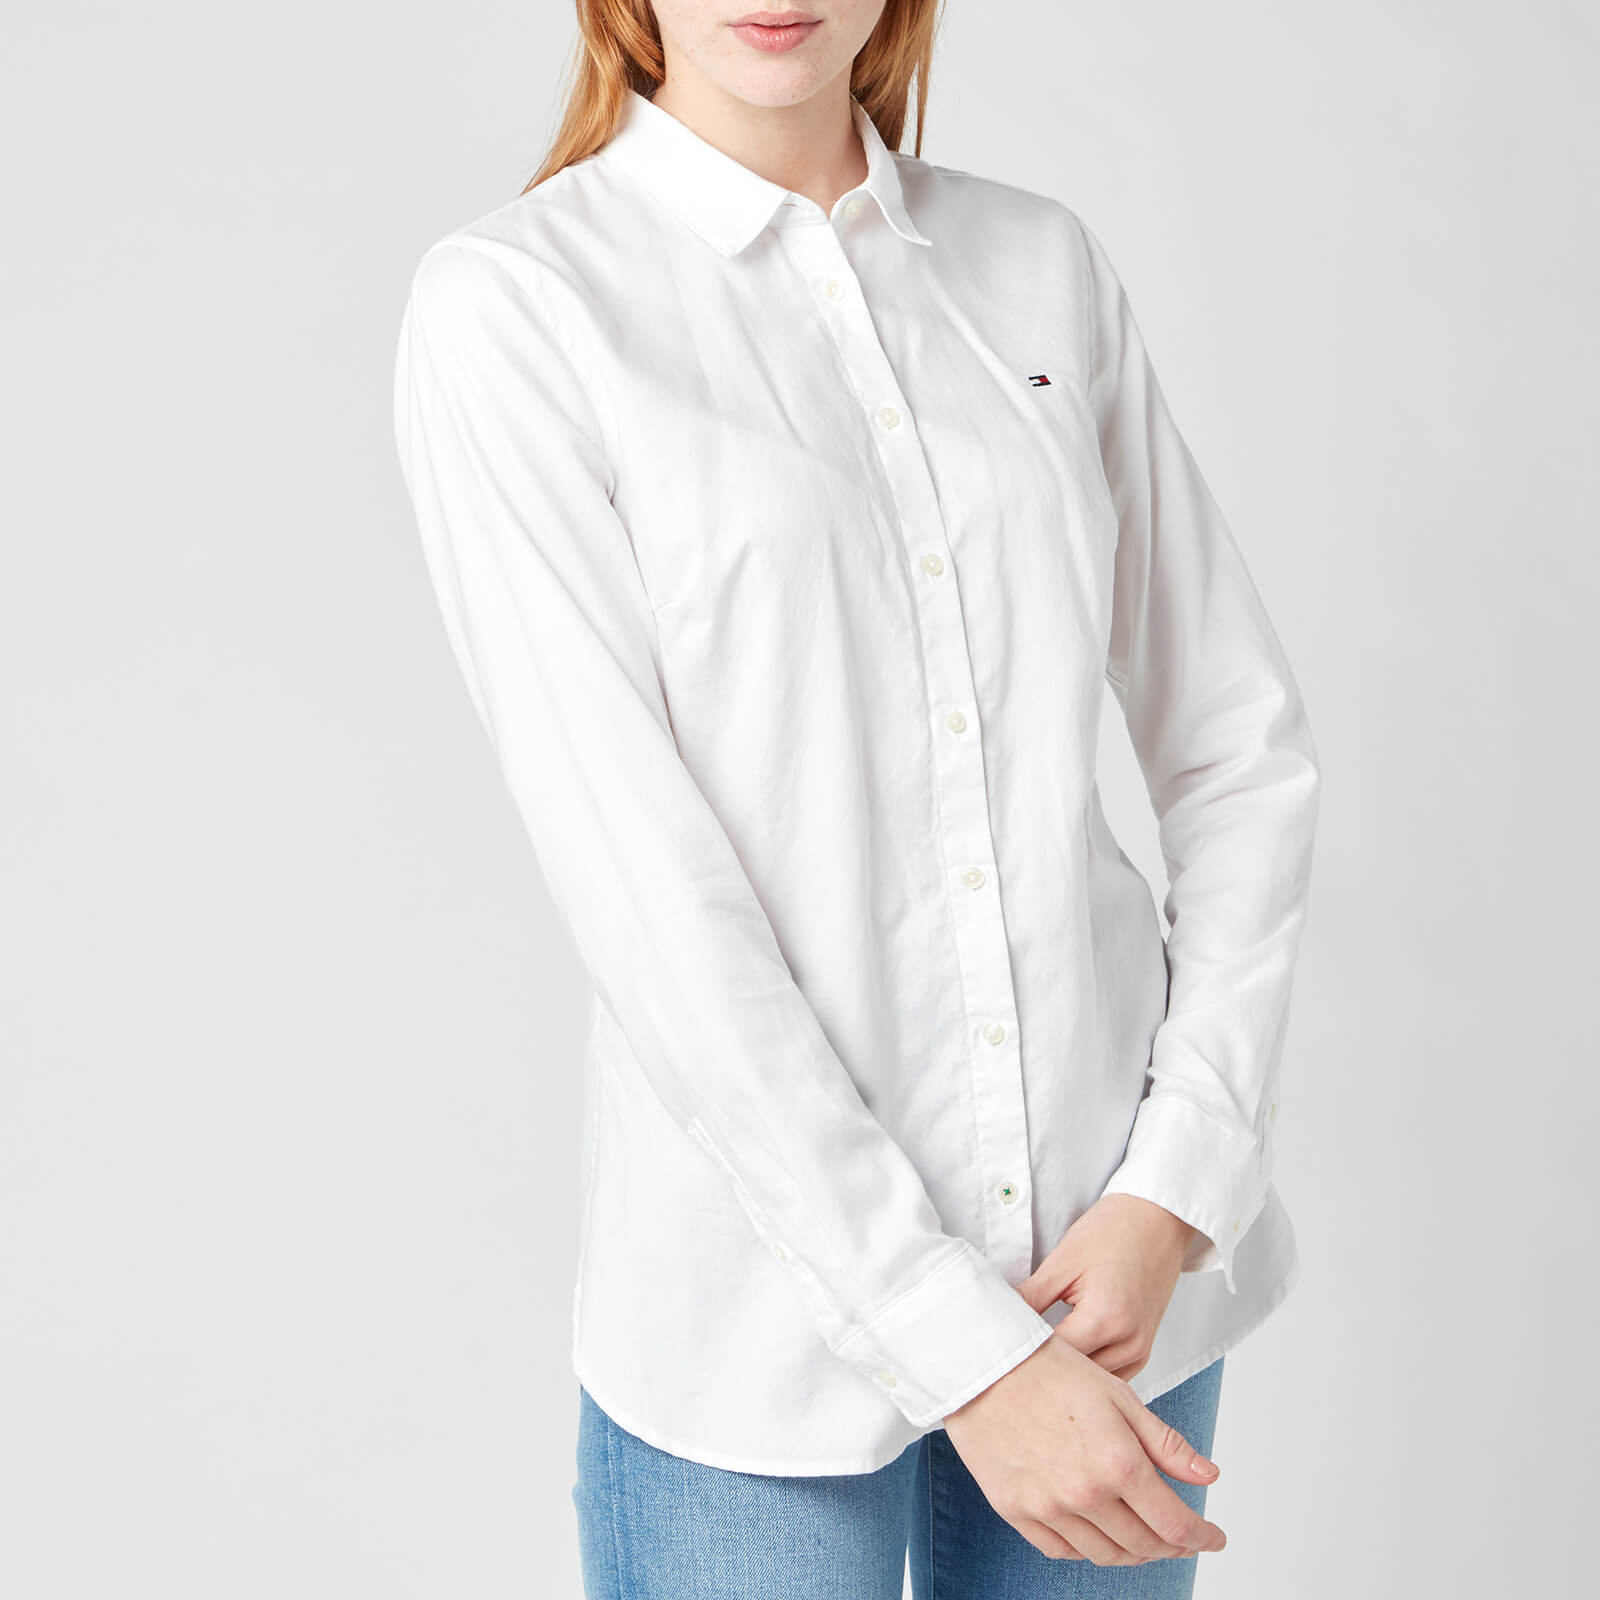 Tommy Hilfiger Women's Heritage Regular Fit Shirt - Classic White - XS